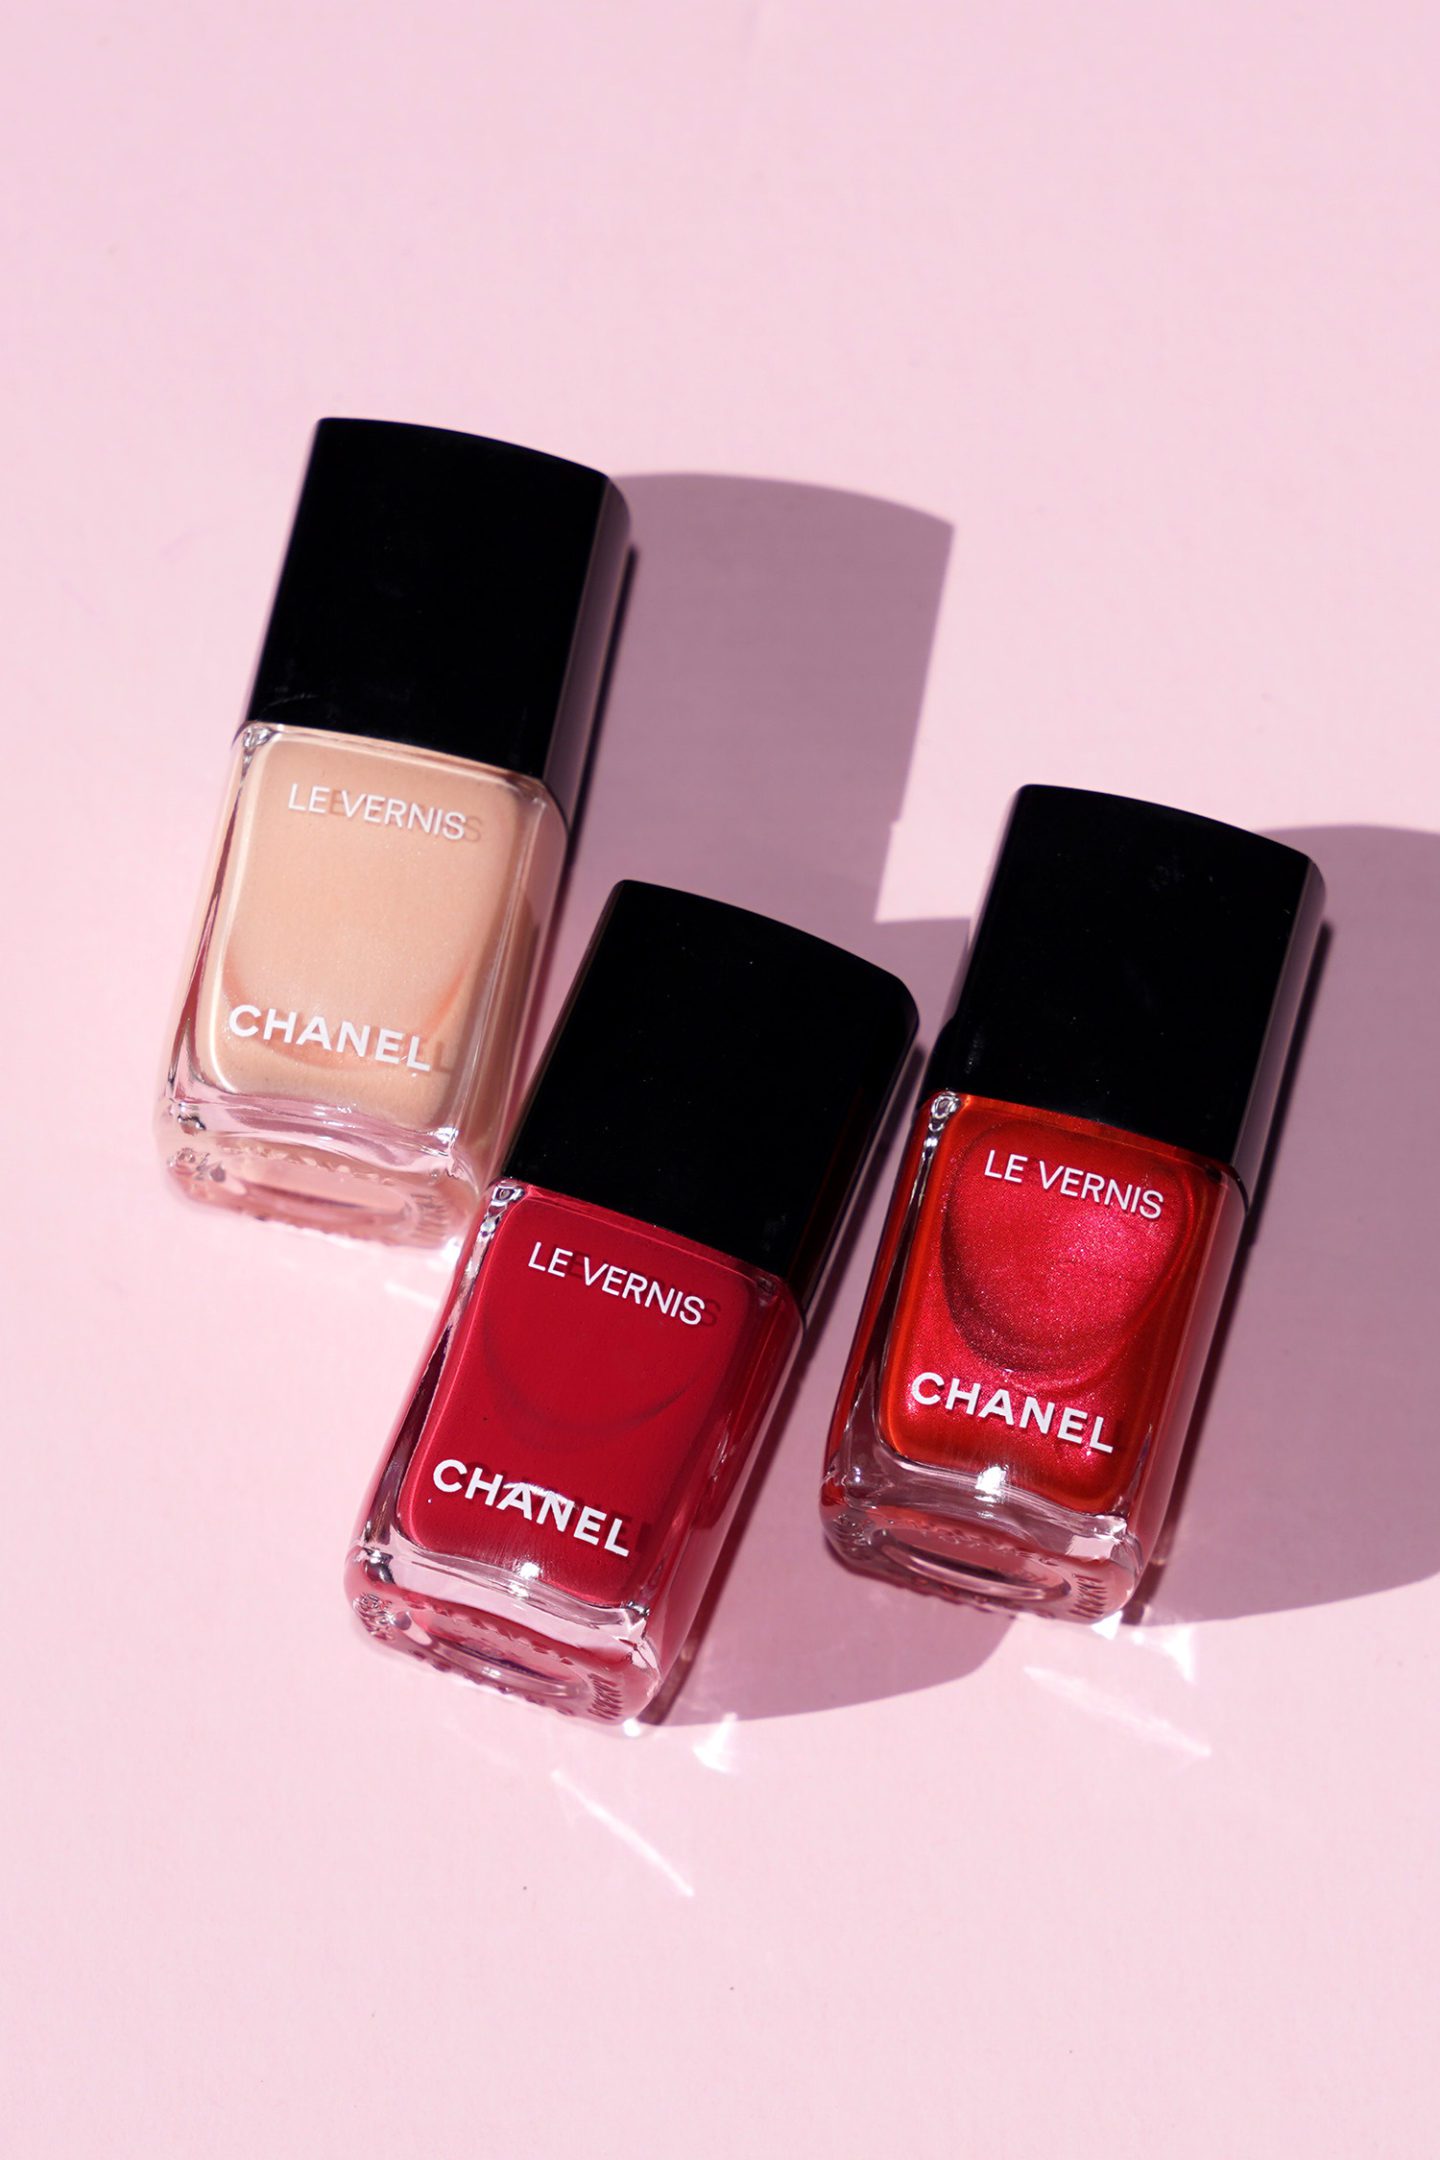 Le Vernis in 883 Pensee, 885 Anthurium and 887 Metallic Bloom